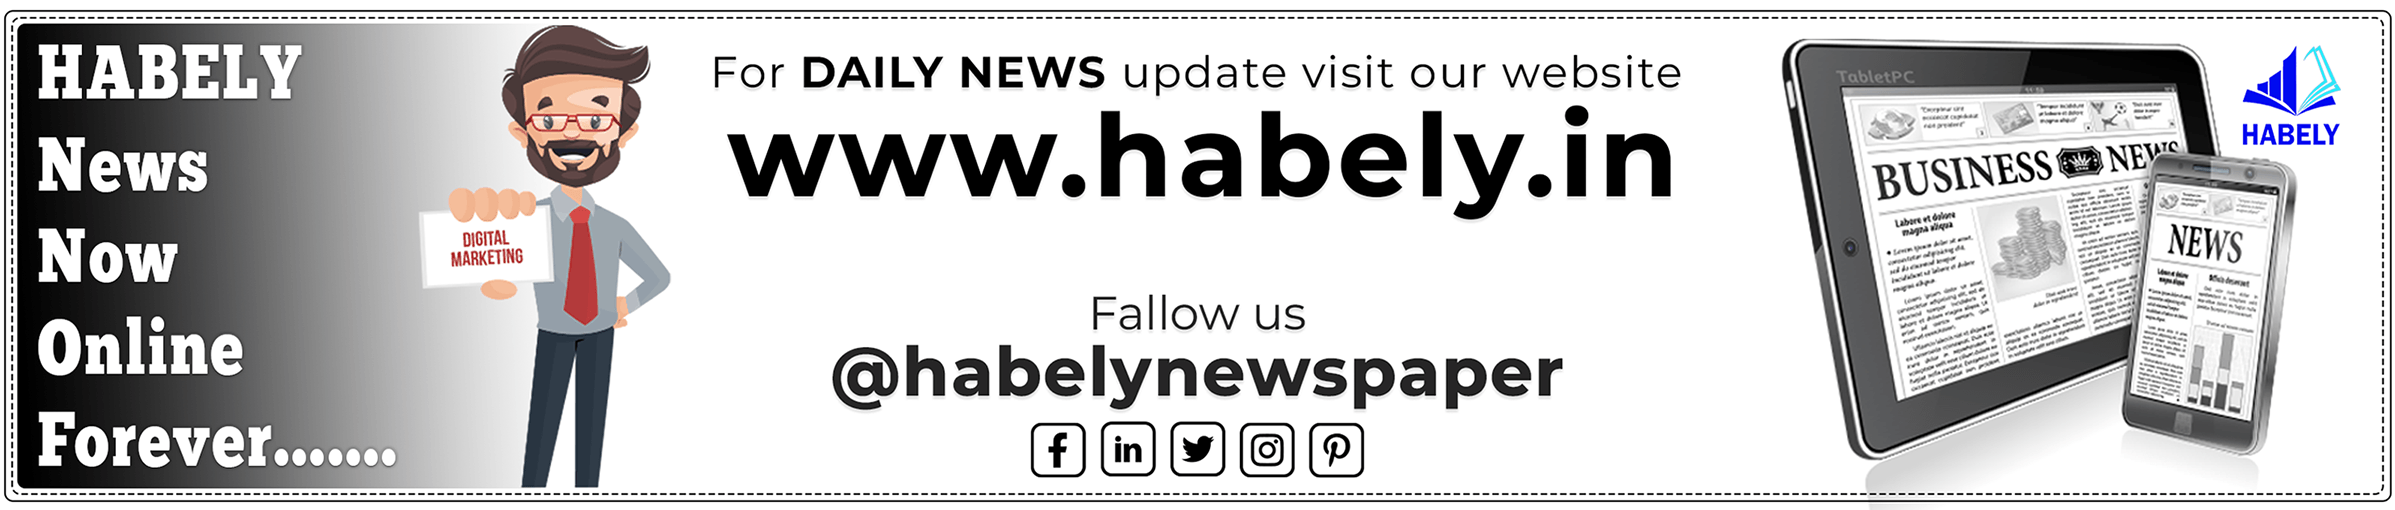 Habely Newspaper News in Bengali Online Newspaper Download bengali epaper Newspaper in bengali bengali News paper bengali newspapers Newspaper online online bengali Newspaper Latest Online News latest news in bengali